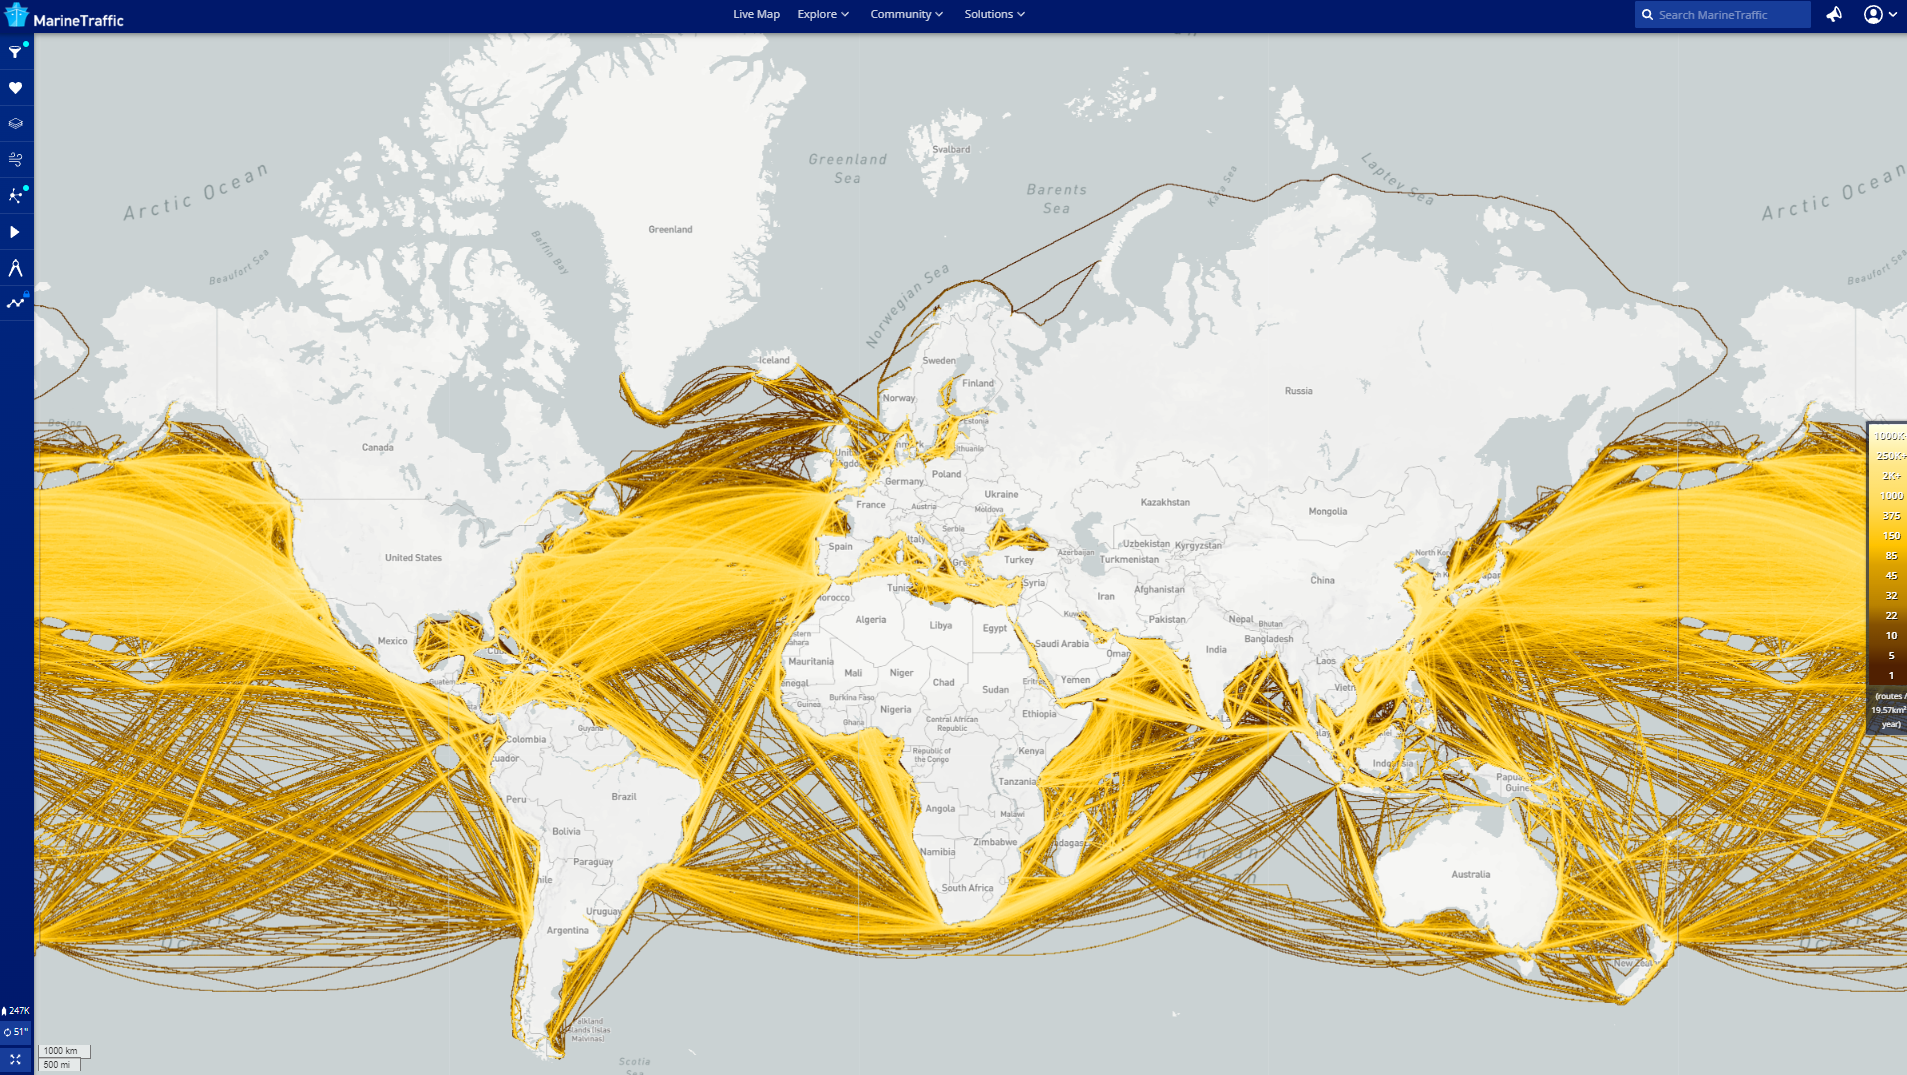 Containership movements in 2021 captured by MarineTraffic